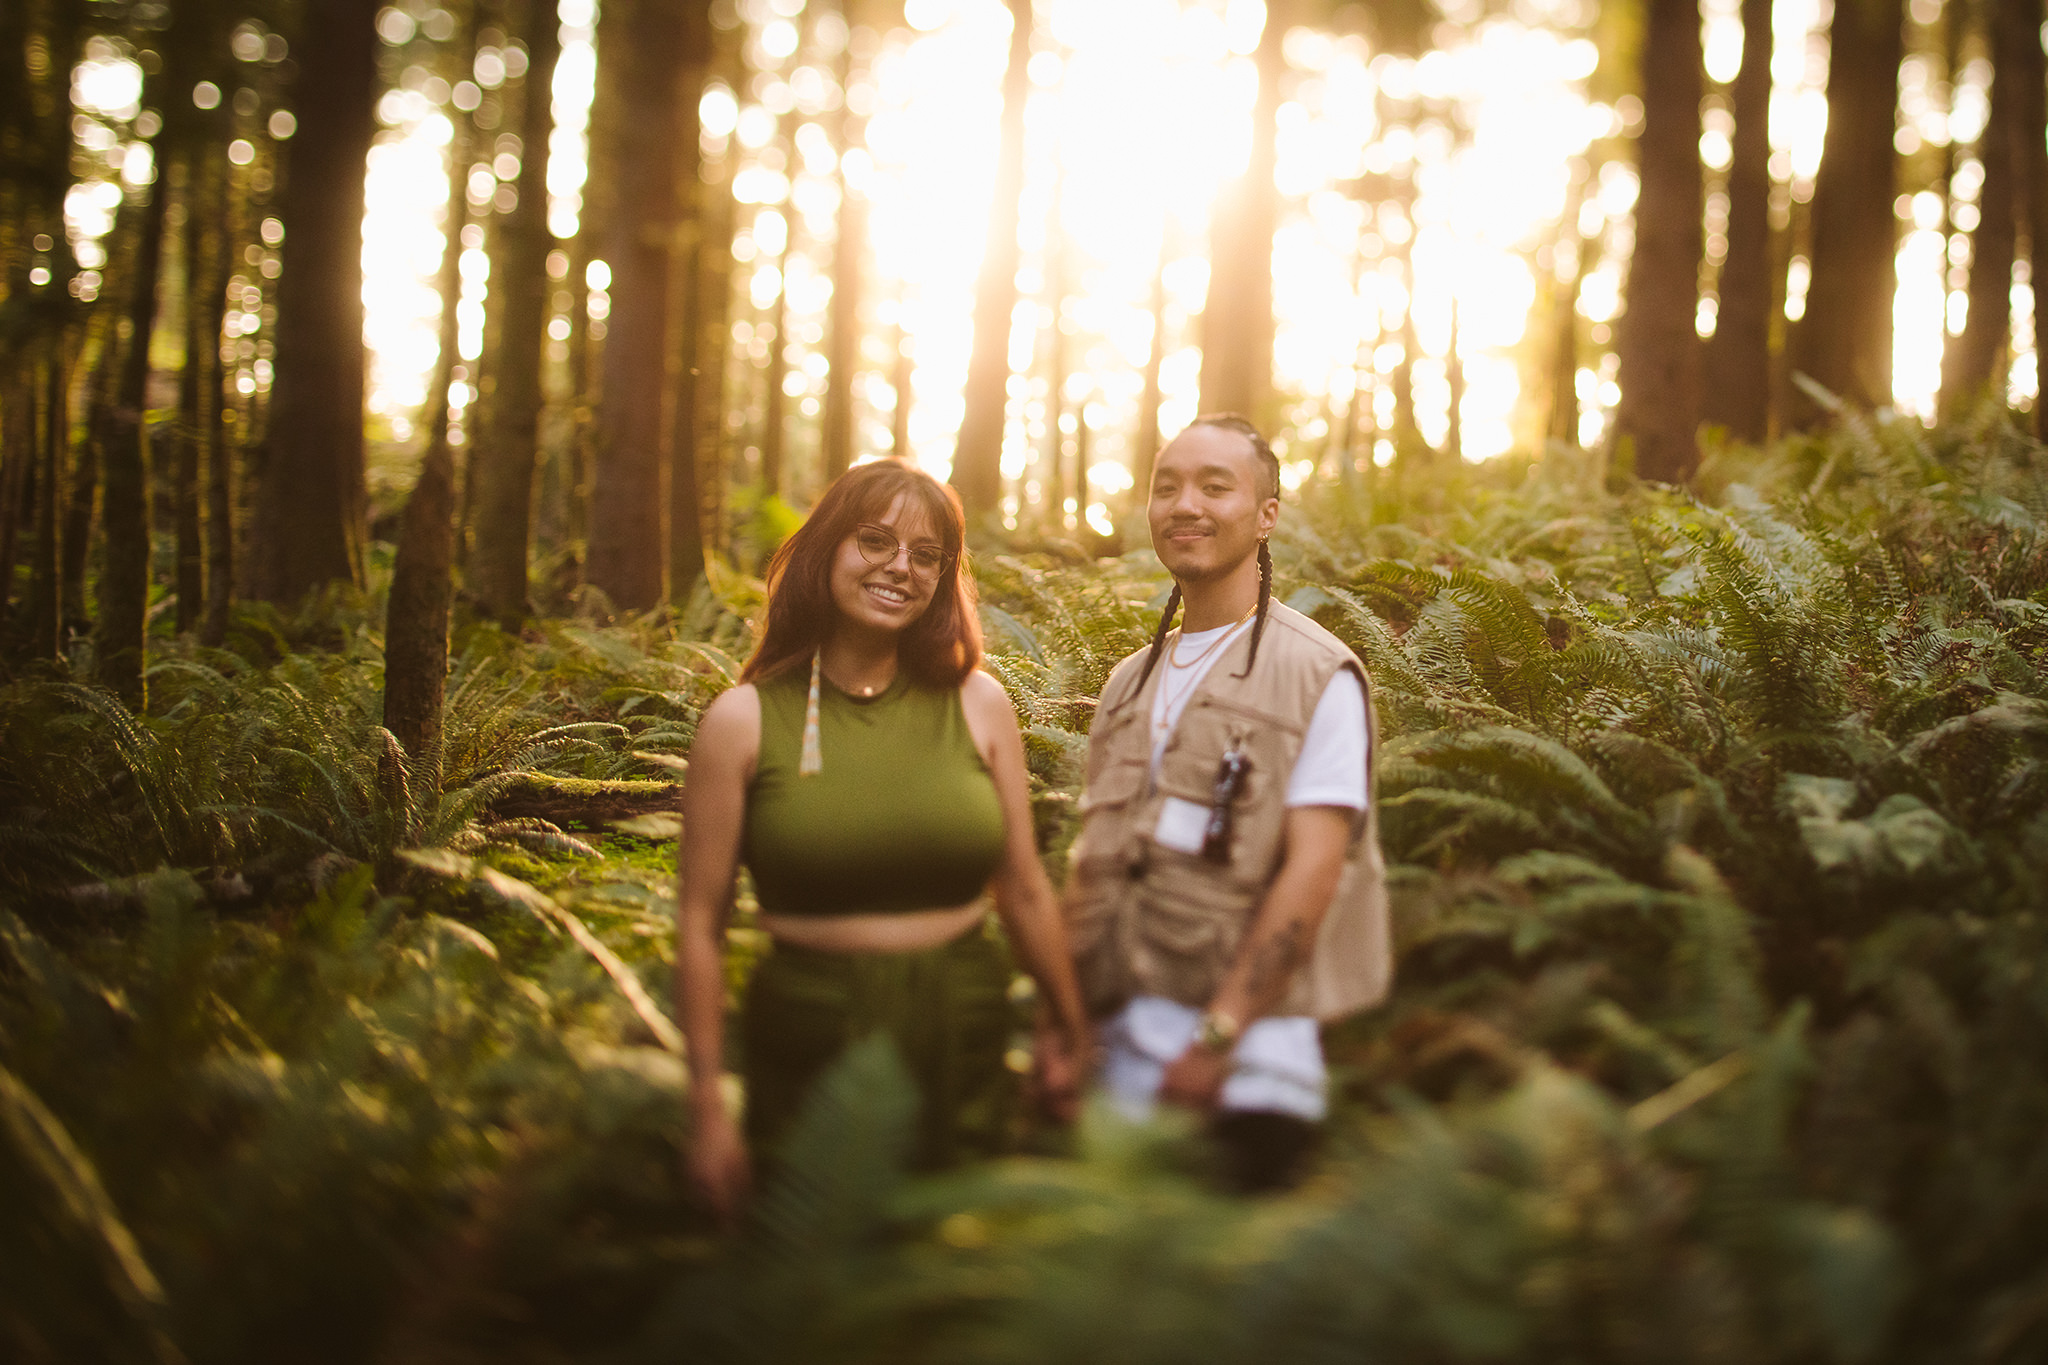 An engagement photo at golden hour in the Oregon forest